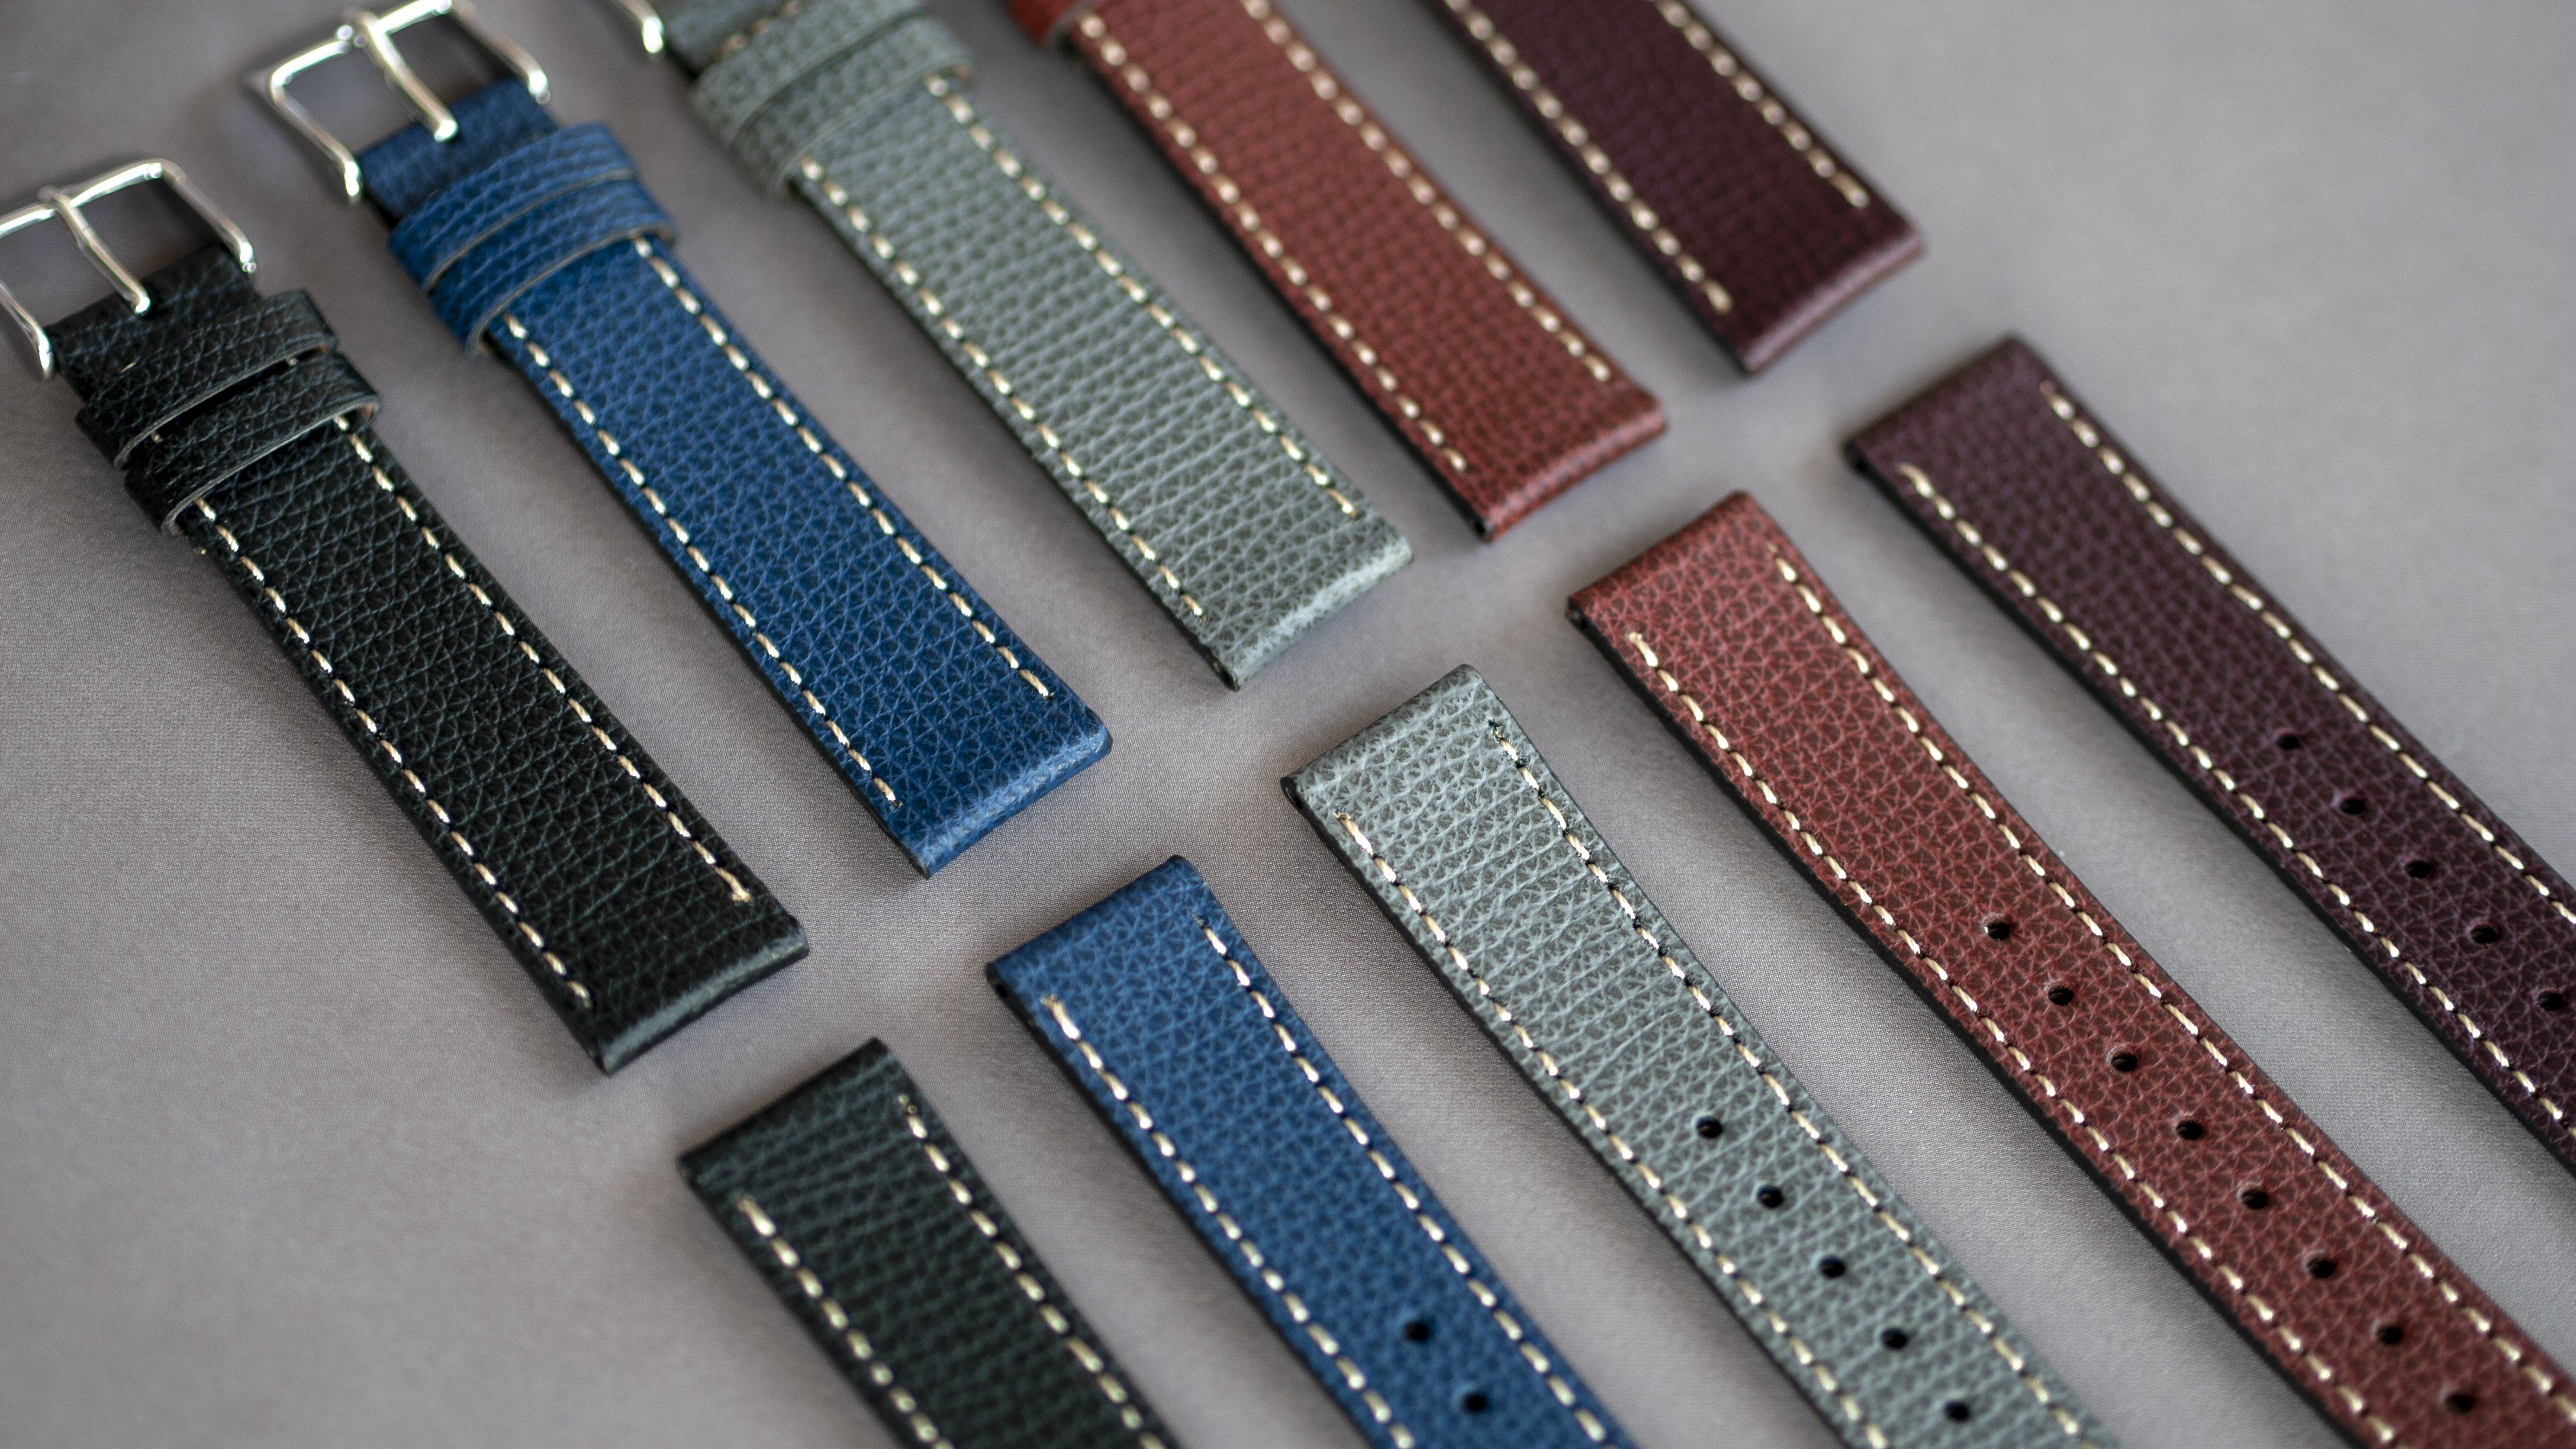 3 more days to get these beautiful vintage watch straps at the best price!